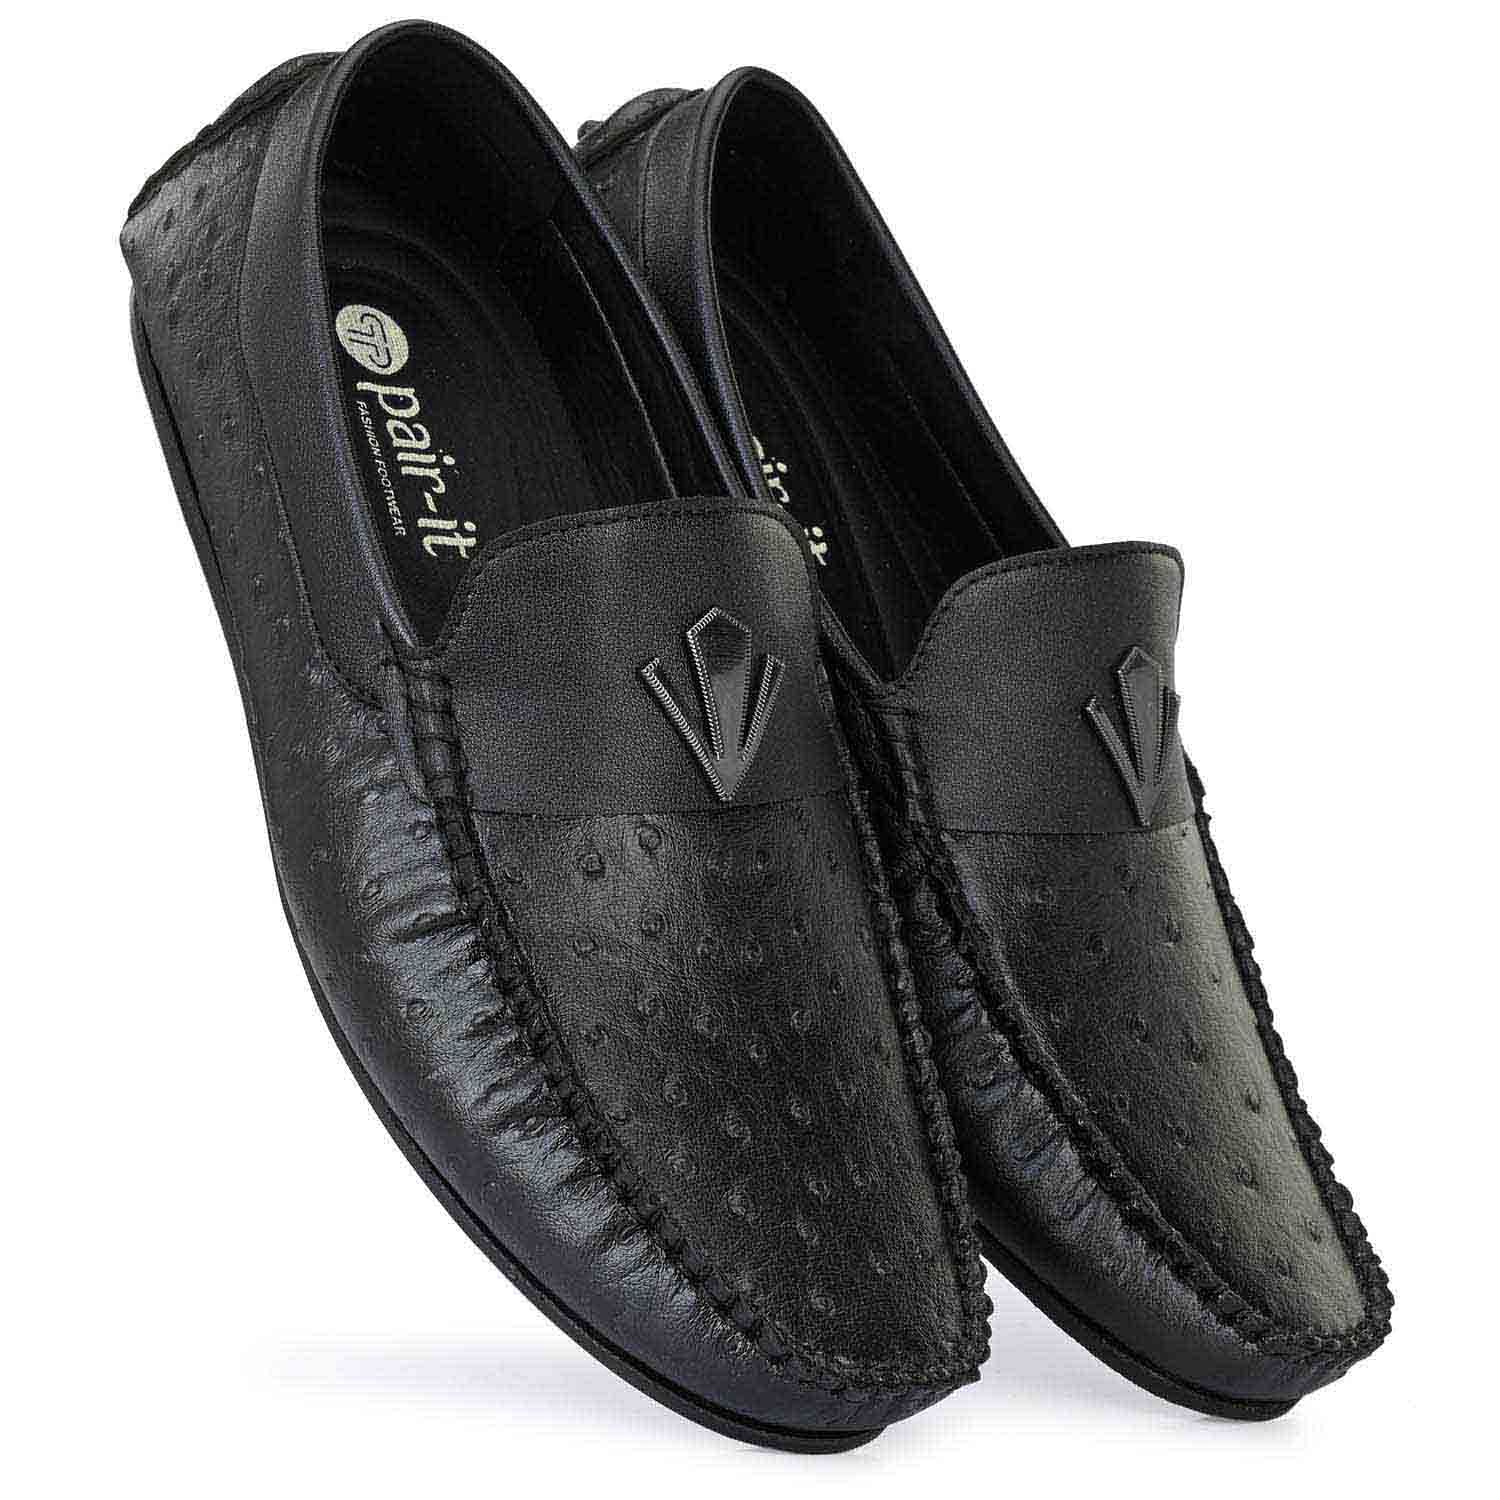 Pair-it Men's Loafers Shoes - KF-Loafer 118 - Black